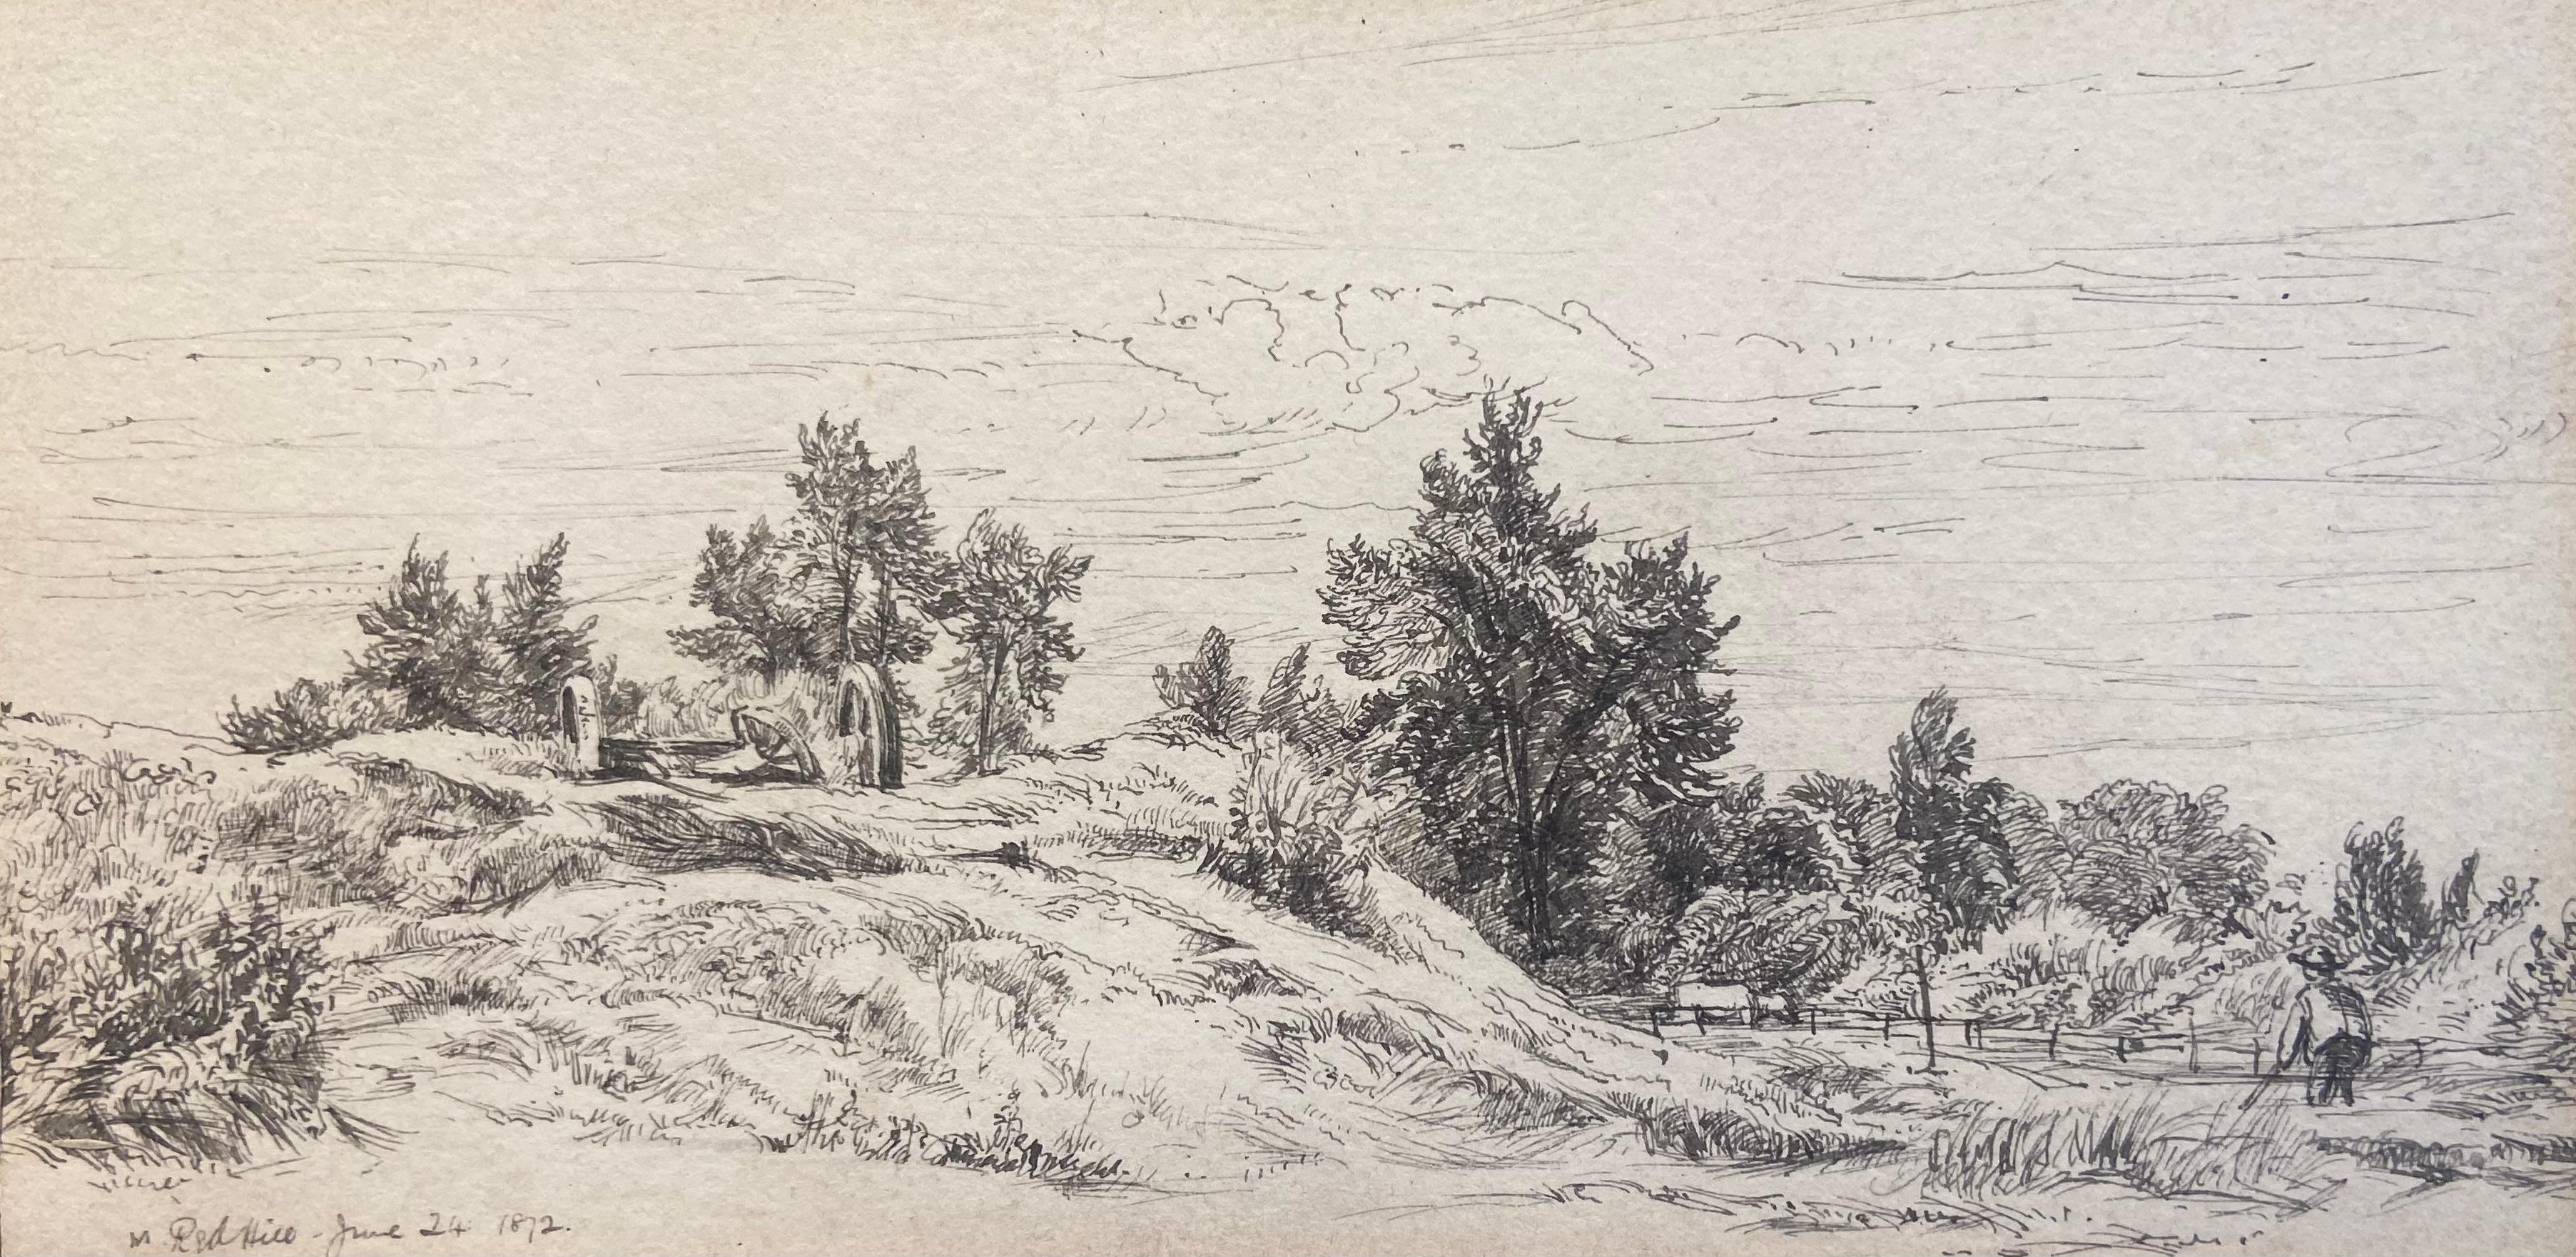 Samuel Palmer (b.1805) Landscape Art - A View Near Redhill, 19th Century Pen and Ink Drawing by Samuel Palmer